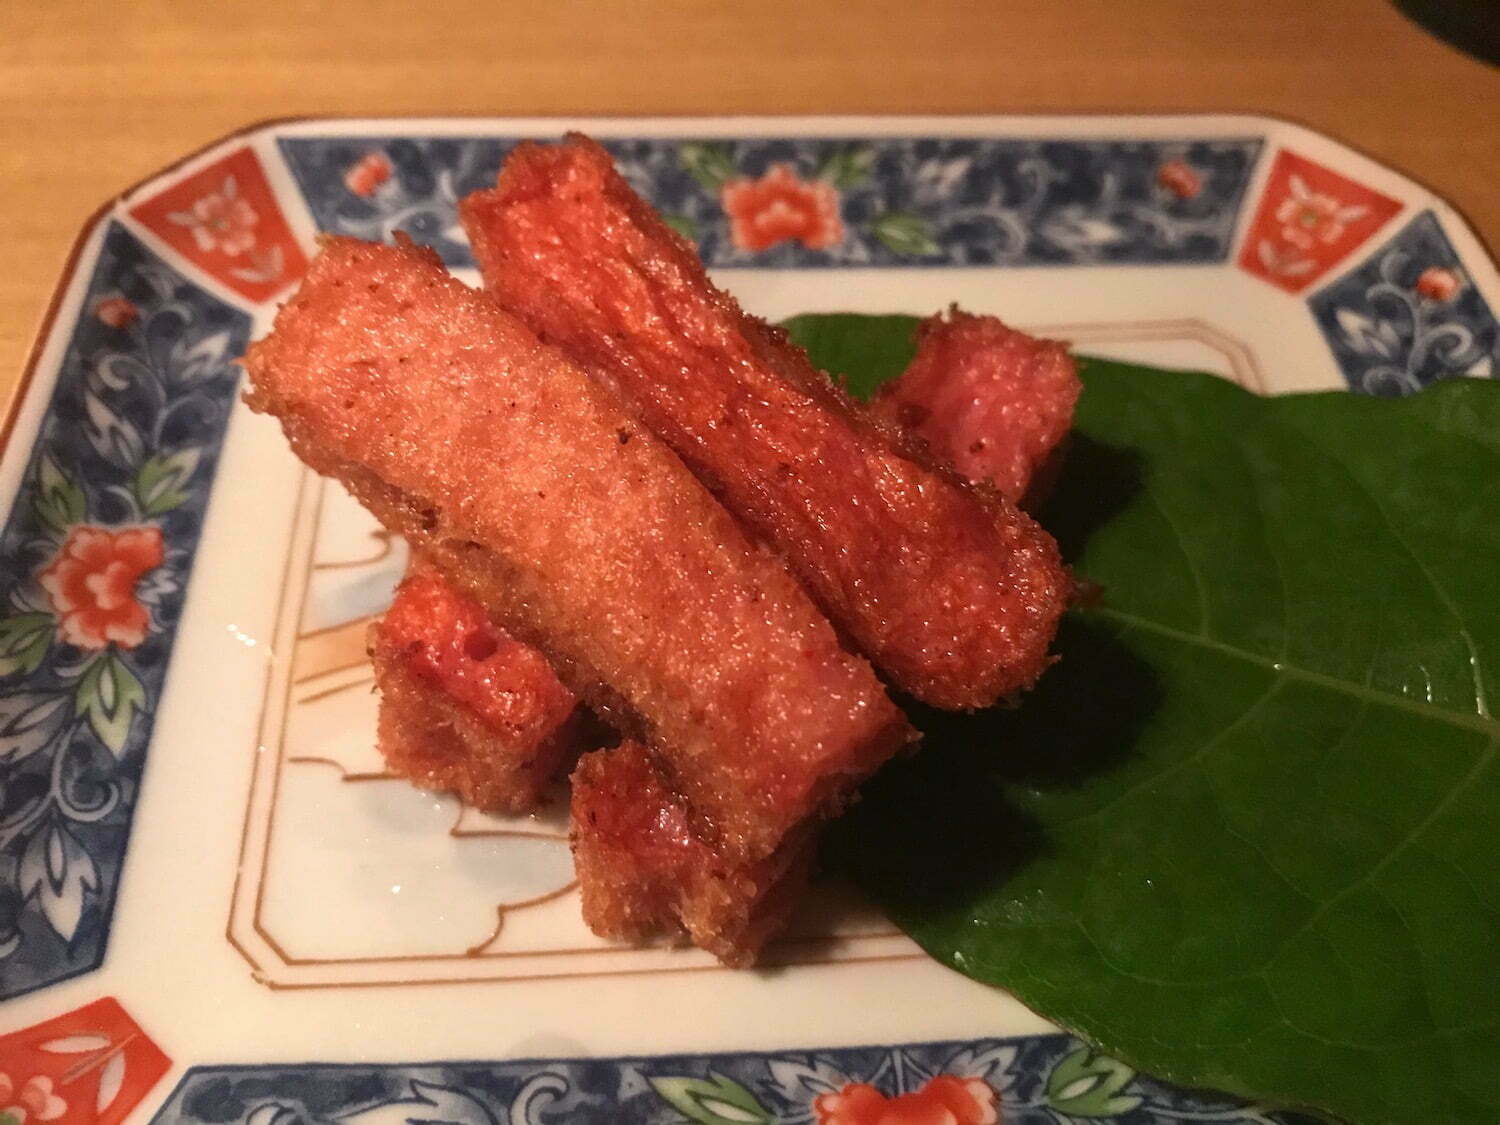 "Aka ten" fried fish paste with red pepper